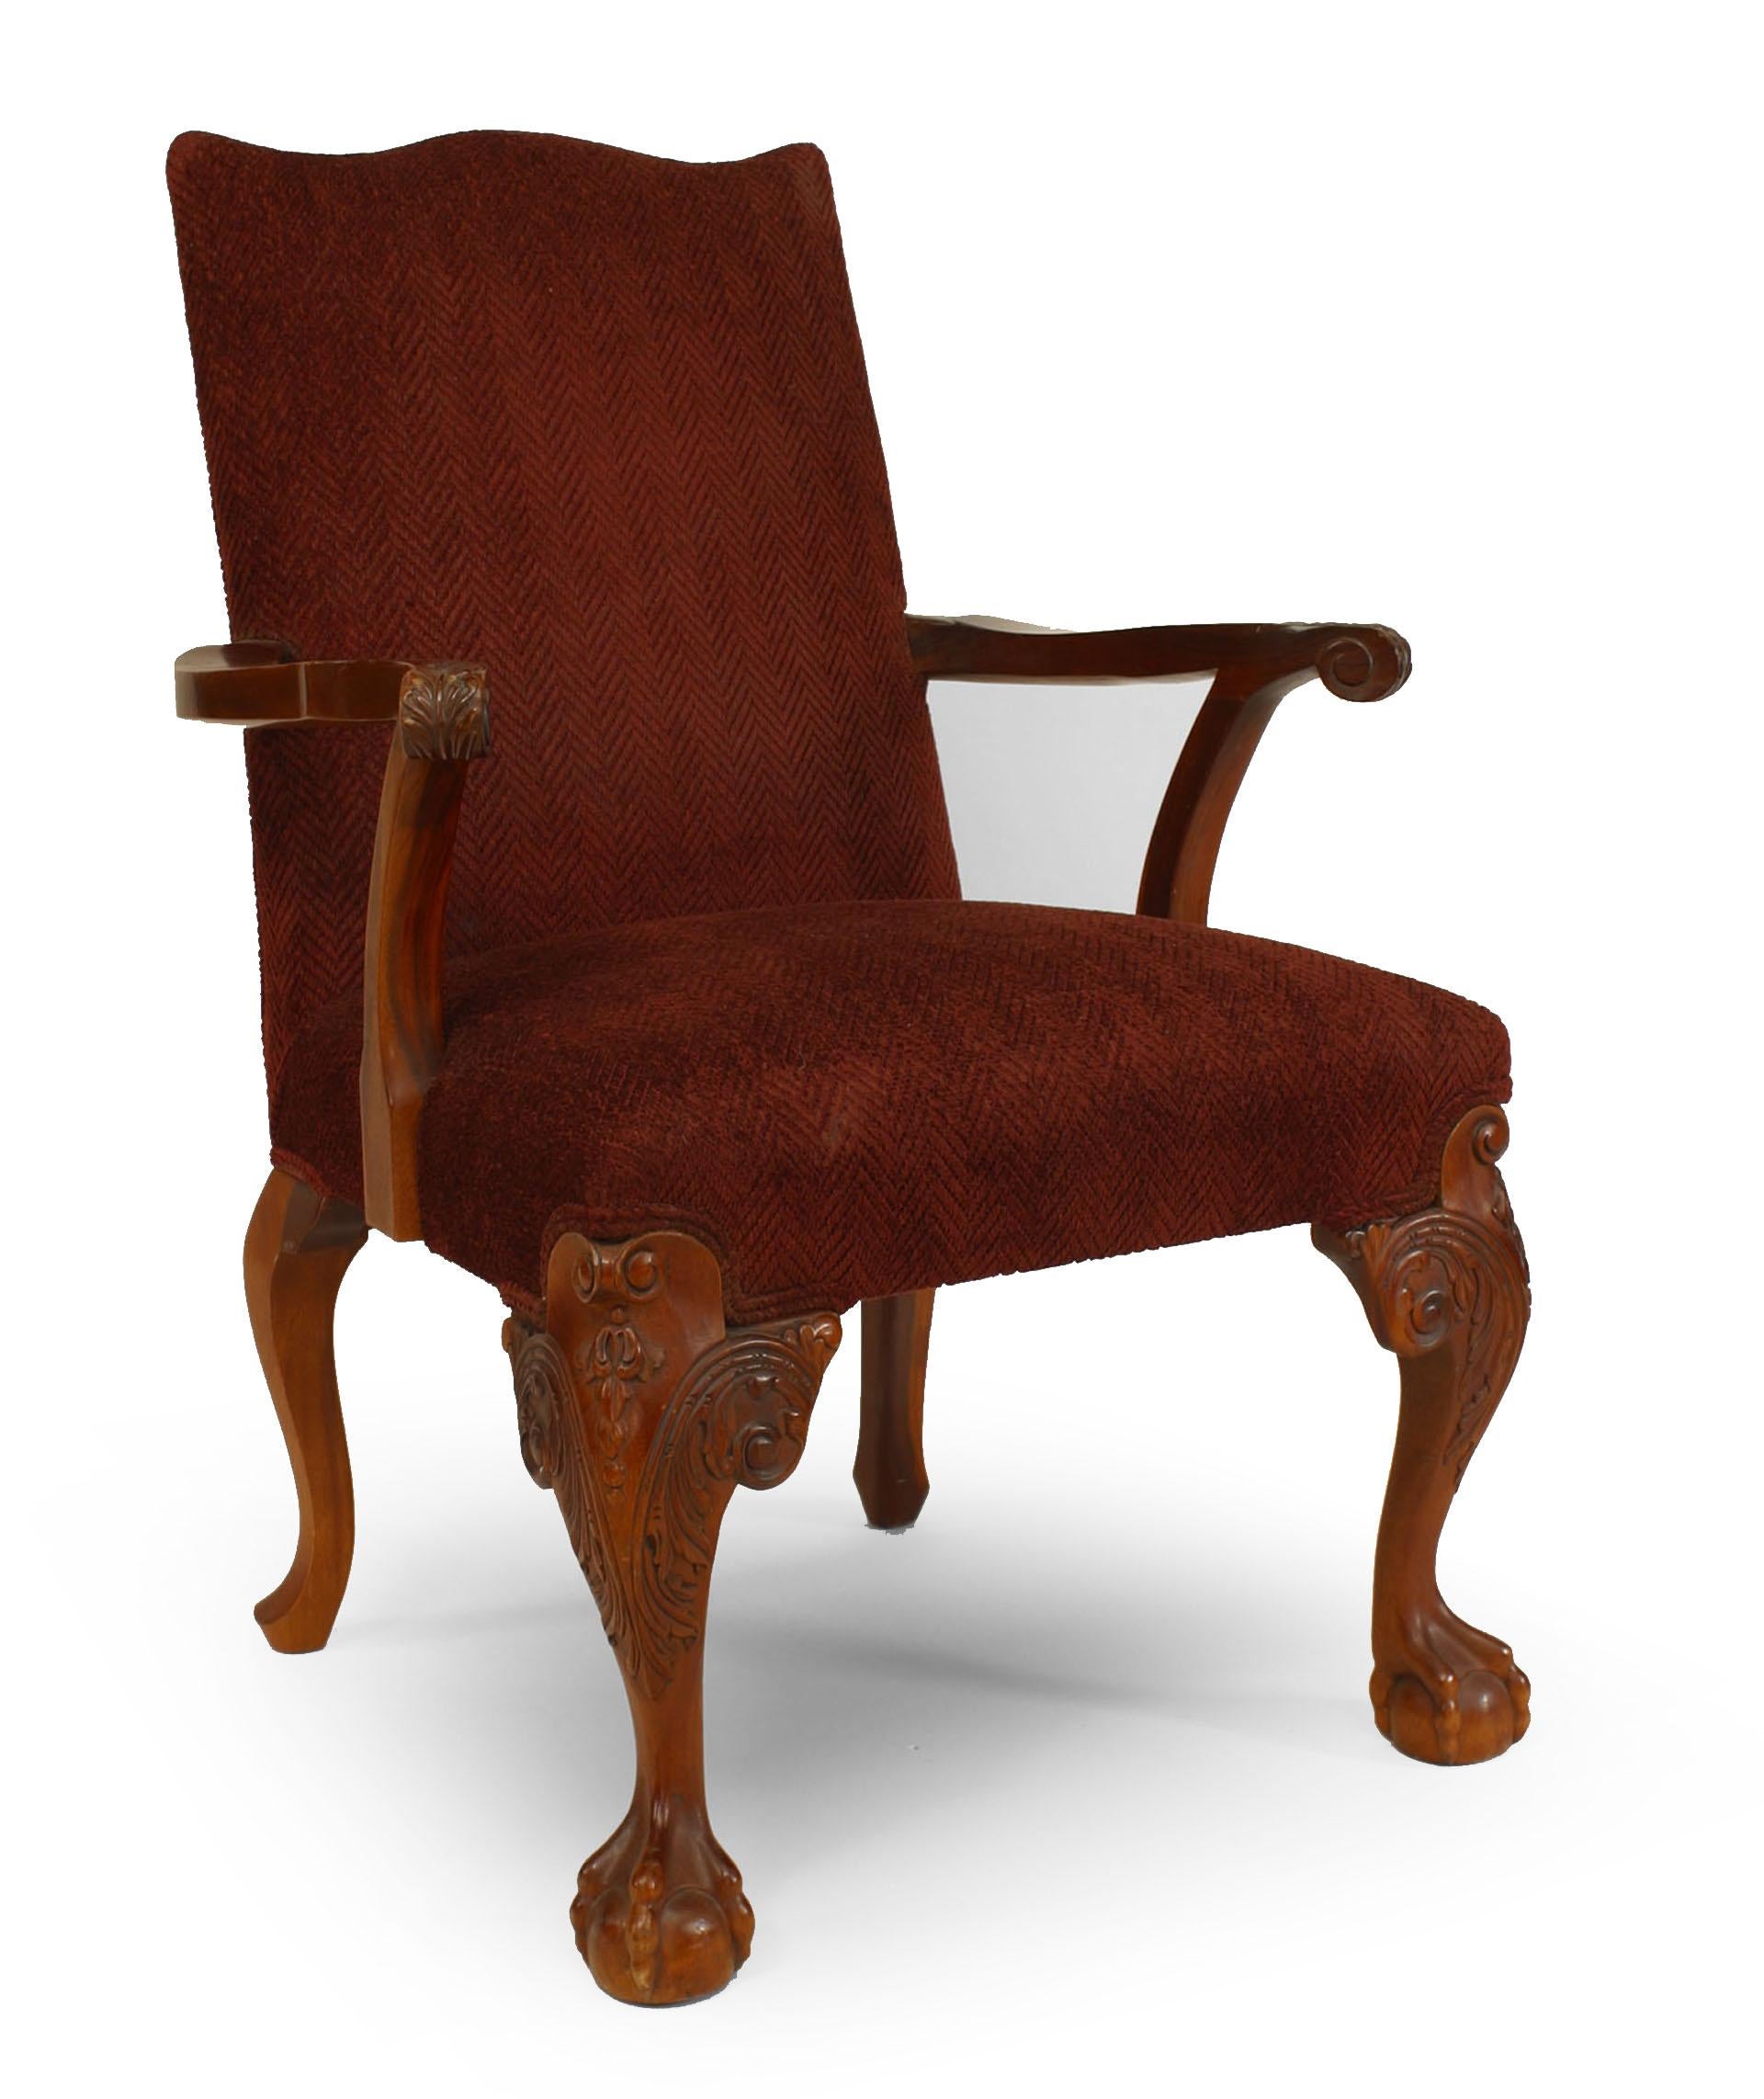 Pair of English Chippendale style (20th century) carved mahogany open arm chairs with maroon herringbone upholstery.